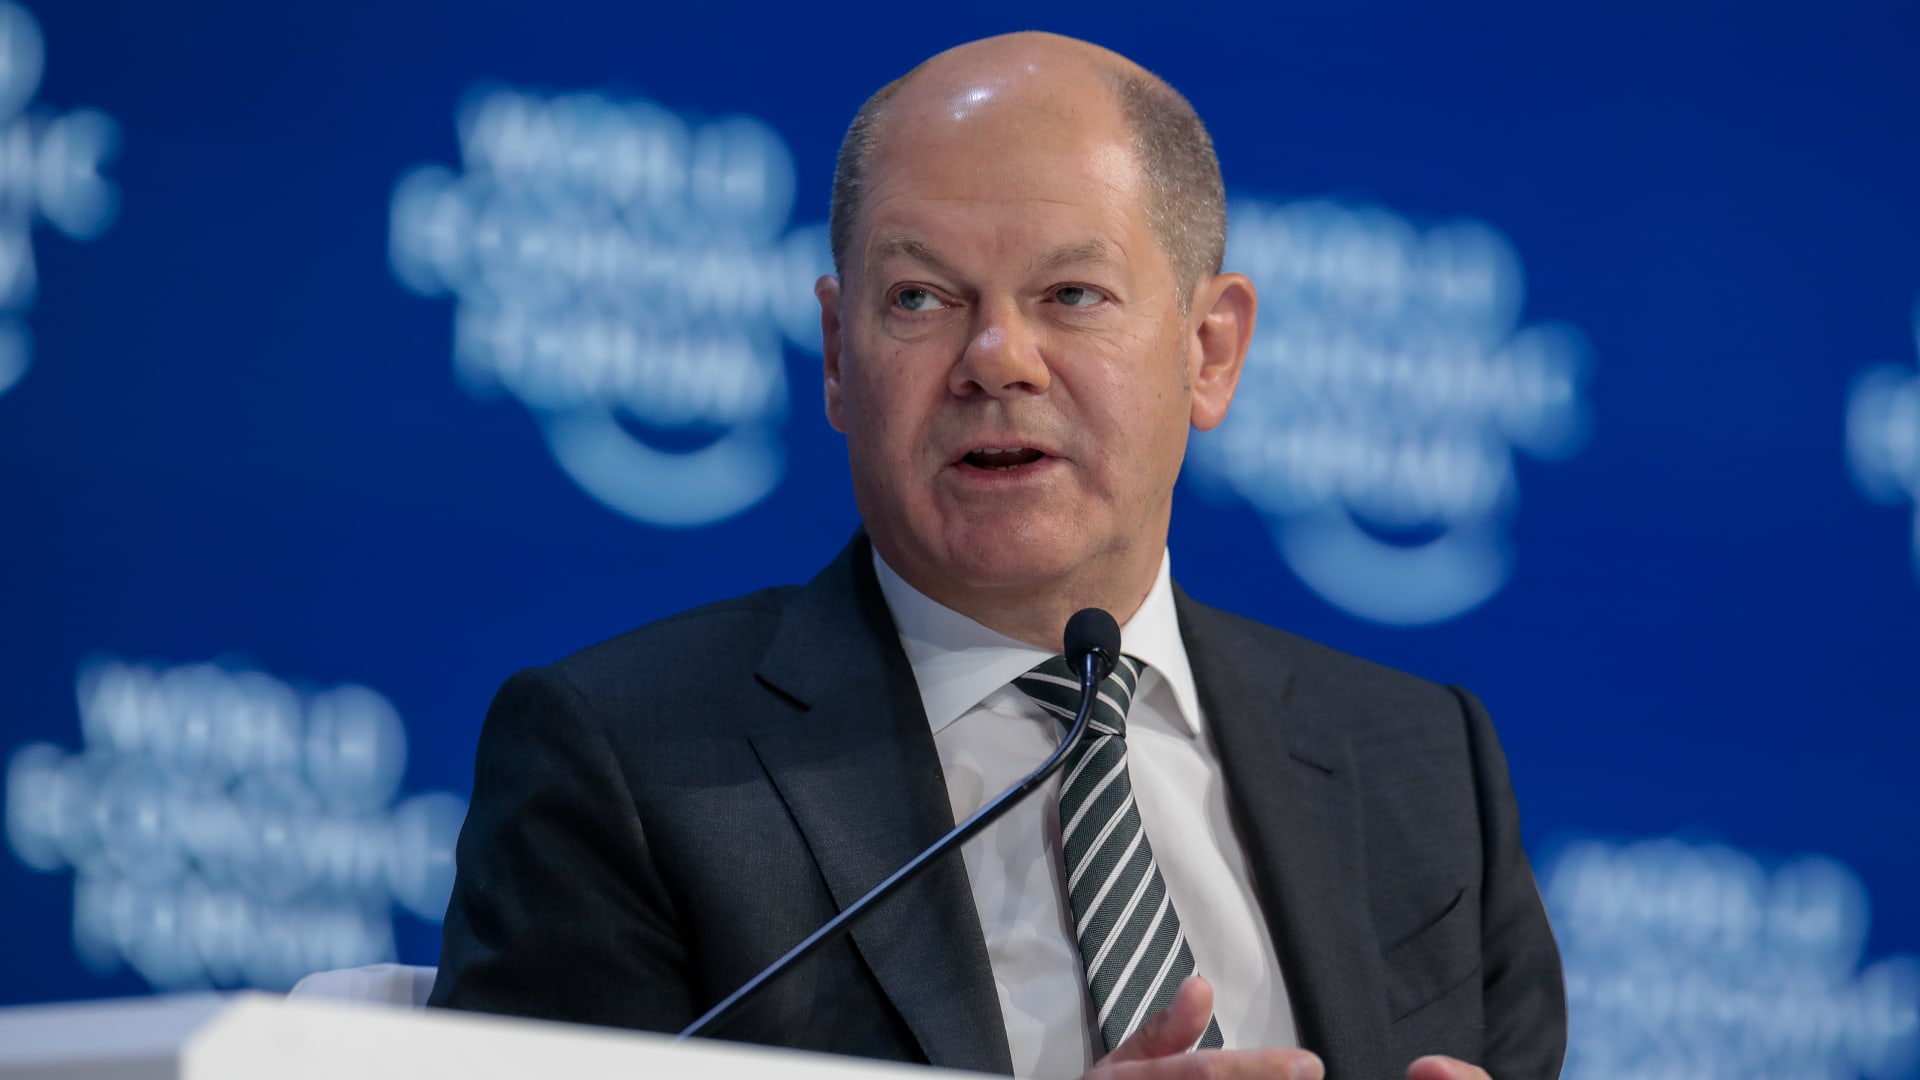 Olaf Scholz, Germany's chancellor speaks at the World Economic Forum (WEF) in Davos, Switzerland.